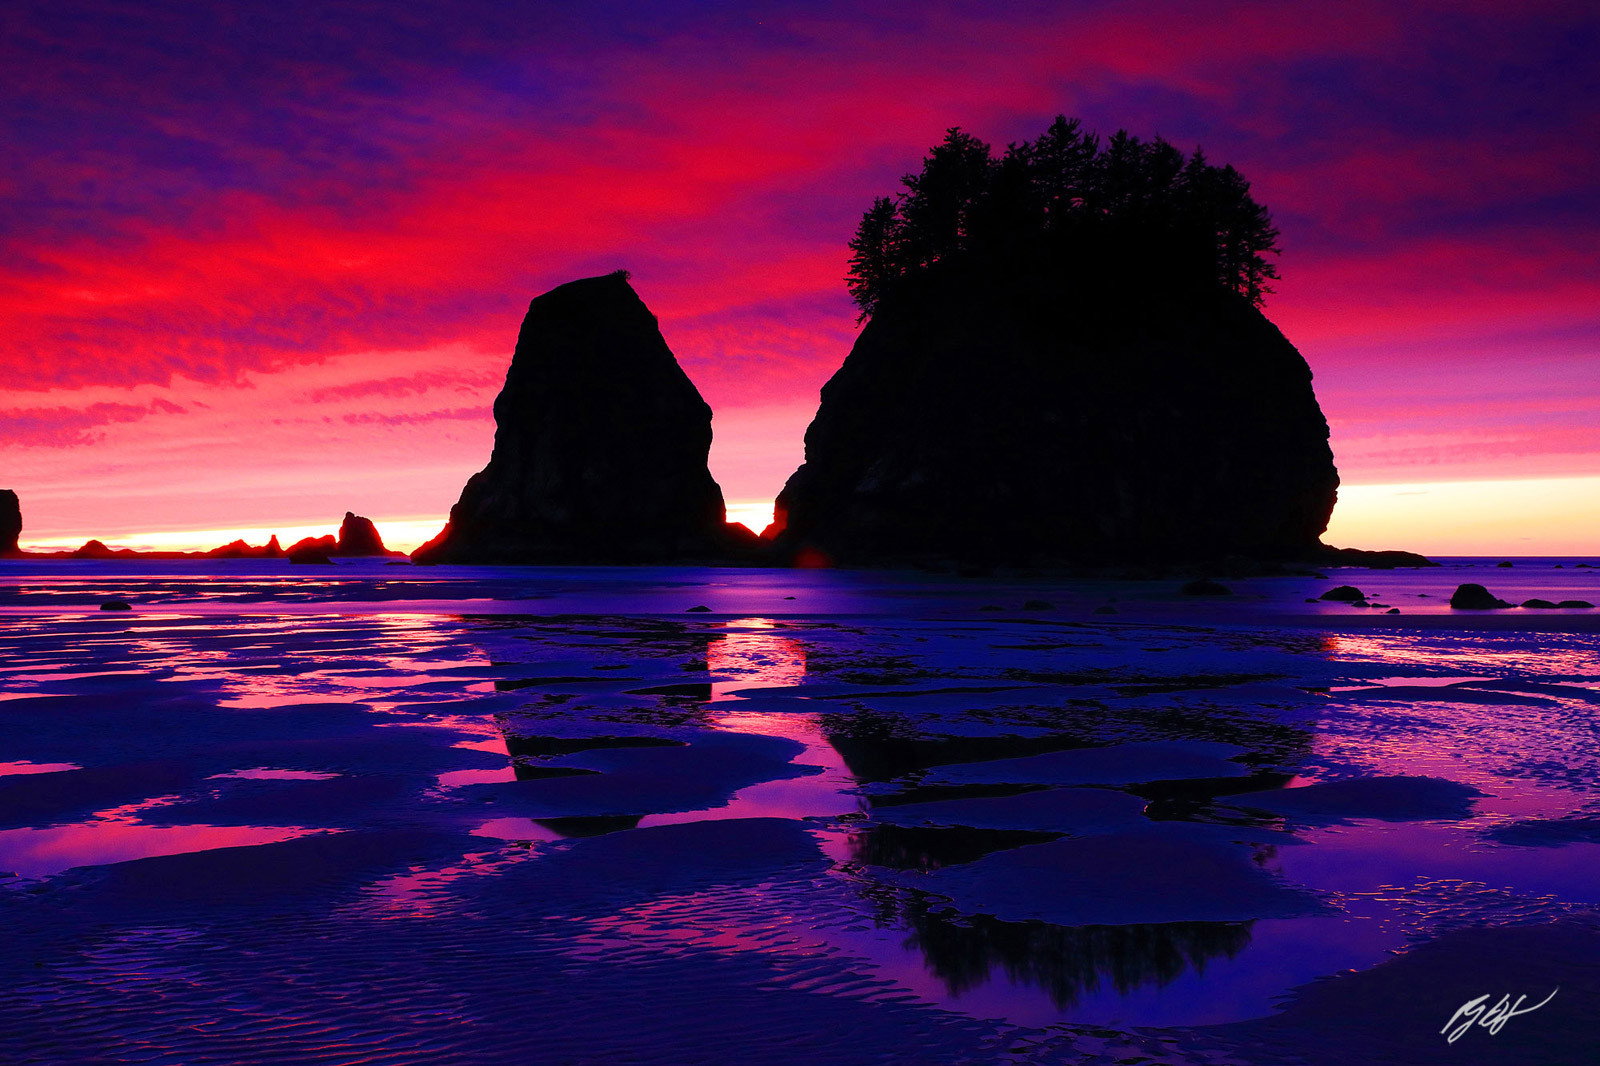 Afterglow Sunset and Sea Stacks on Second Beach in Olympic National Park in Washington